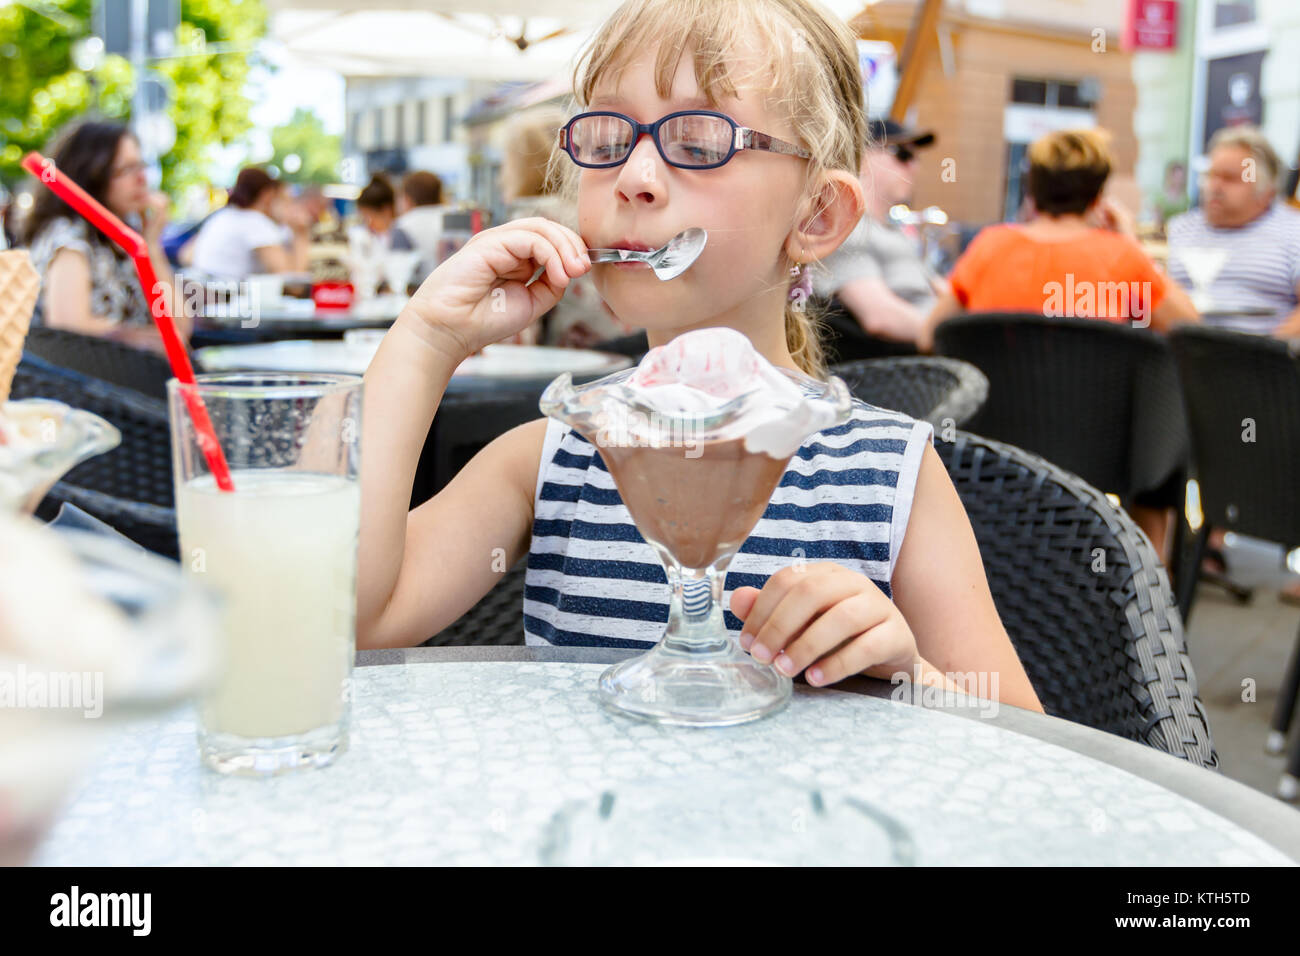 Little cute girl with glasses and carefree face expression is eating ice cream at table in pastry shop in summertime. Stock Photo